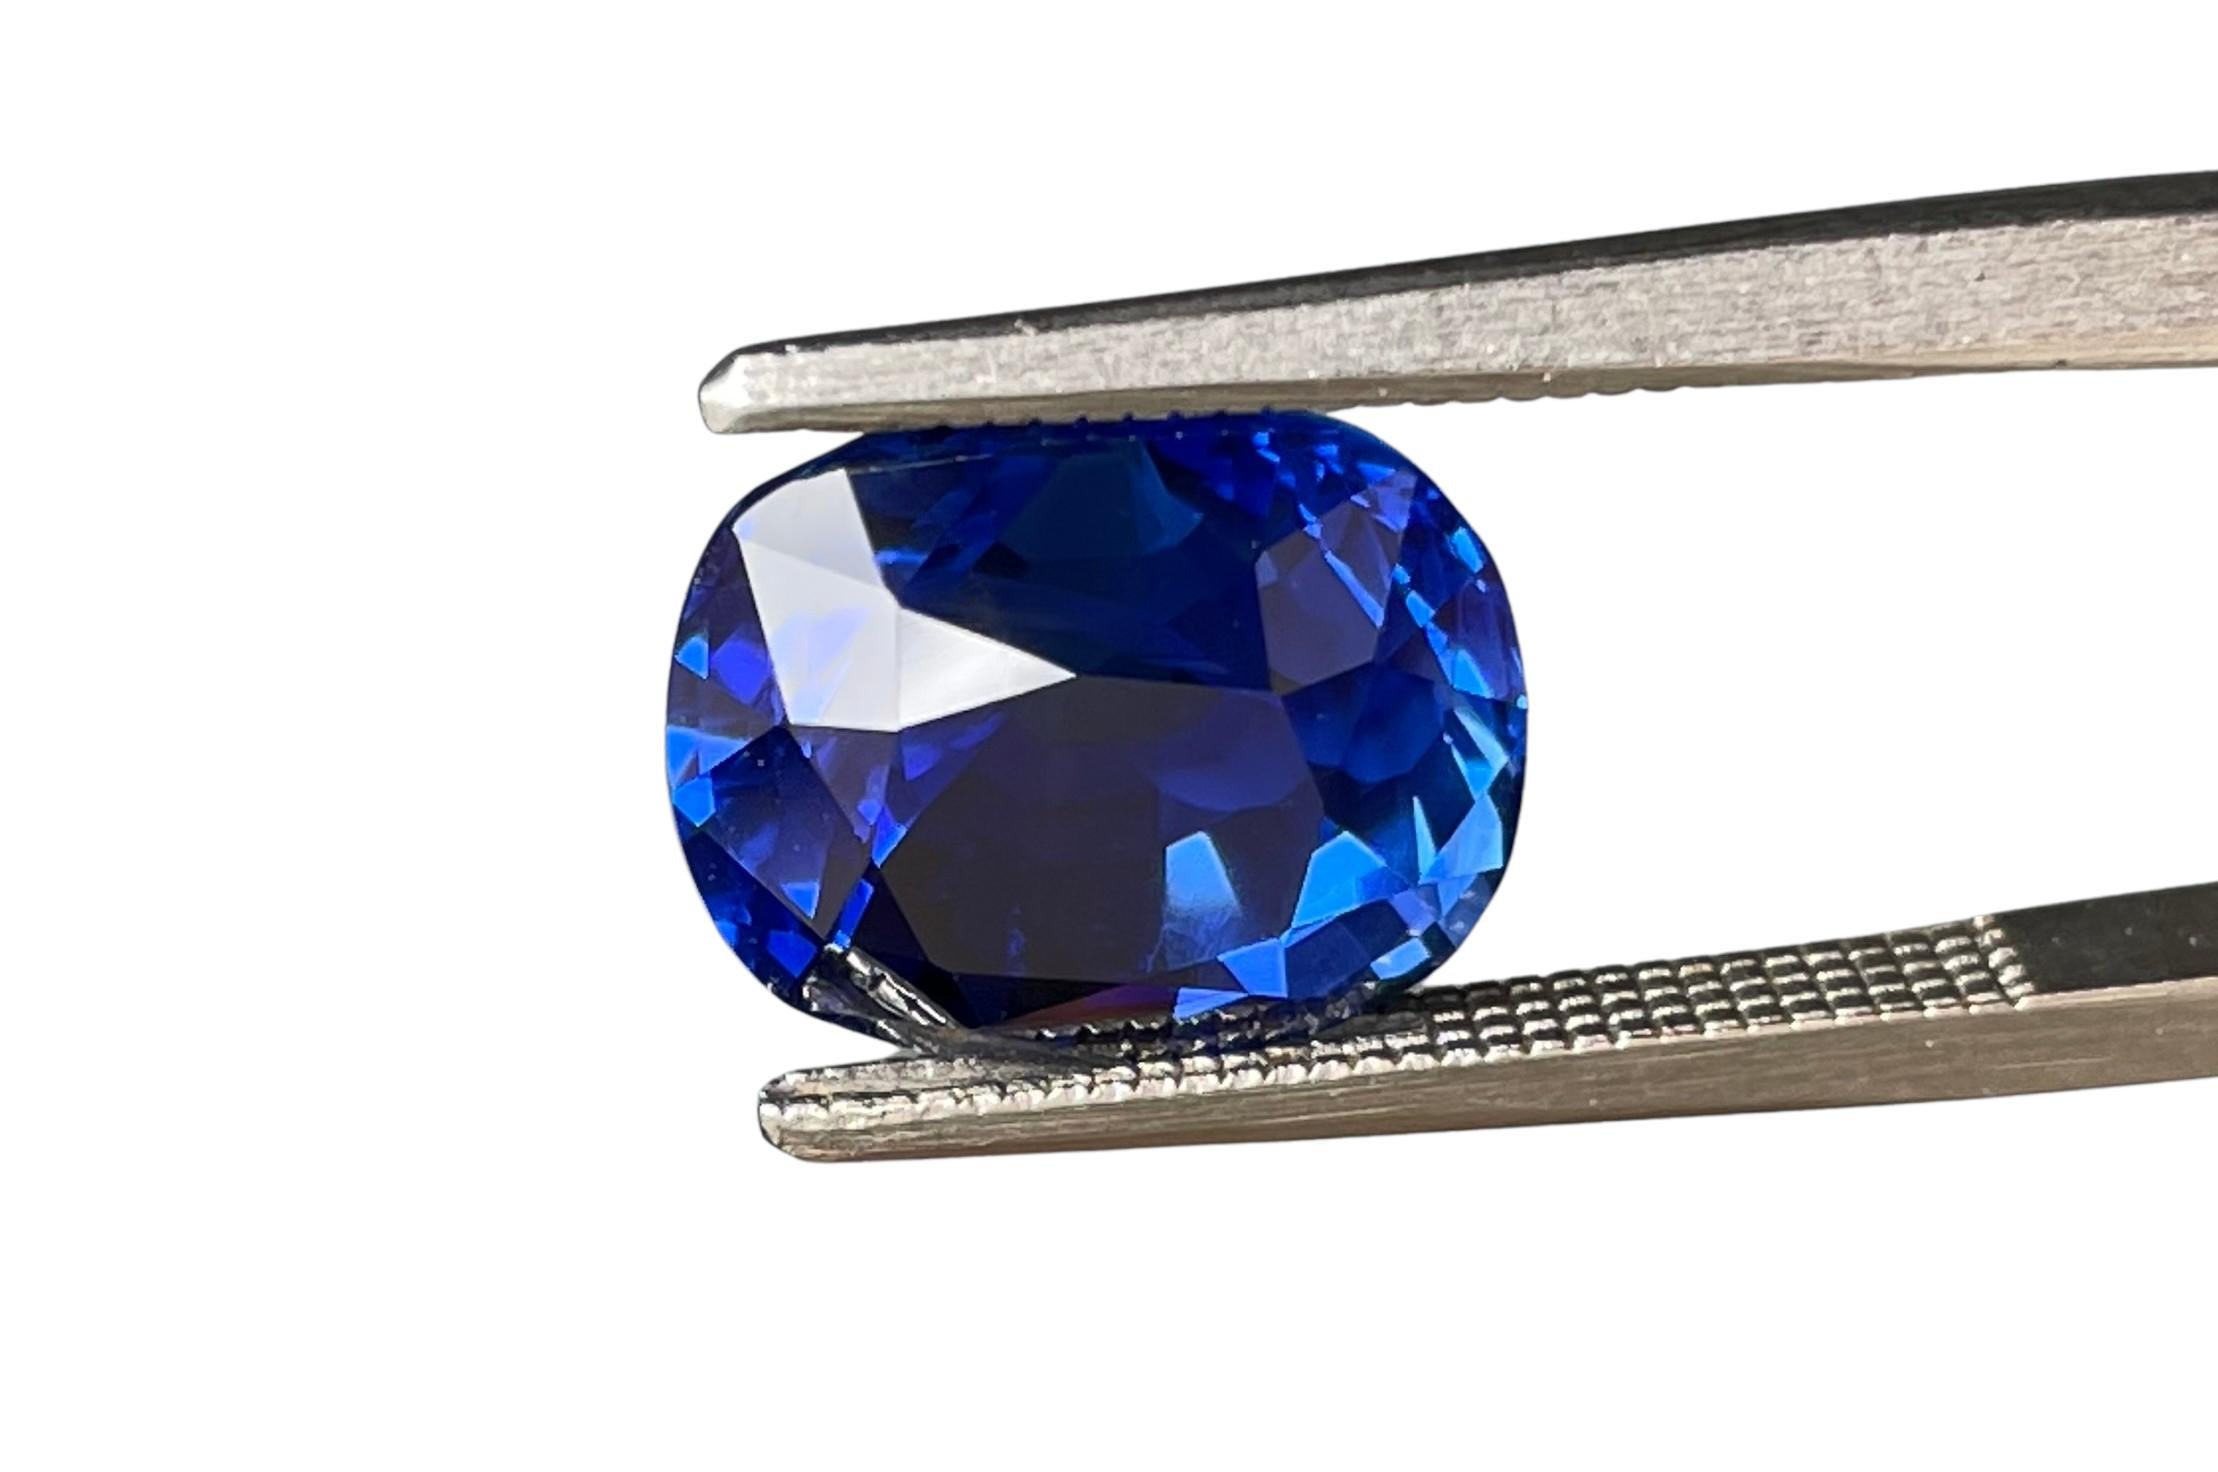 Incredible GIA 4 carat cushion cut sapphire. 

It is a magnificent gem from KASHMIR, the best origin for these stones. 
This sapphire shows no signs of heat treatment and its color is an incredible vivid blue